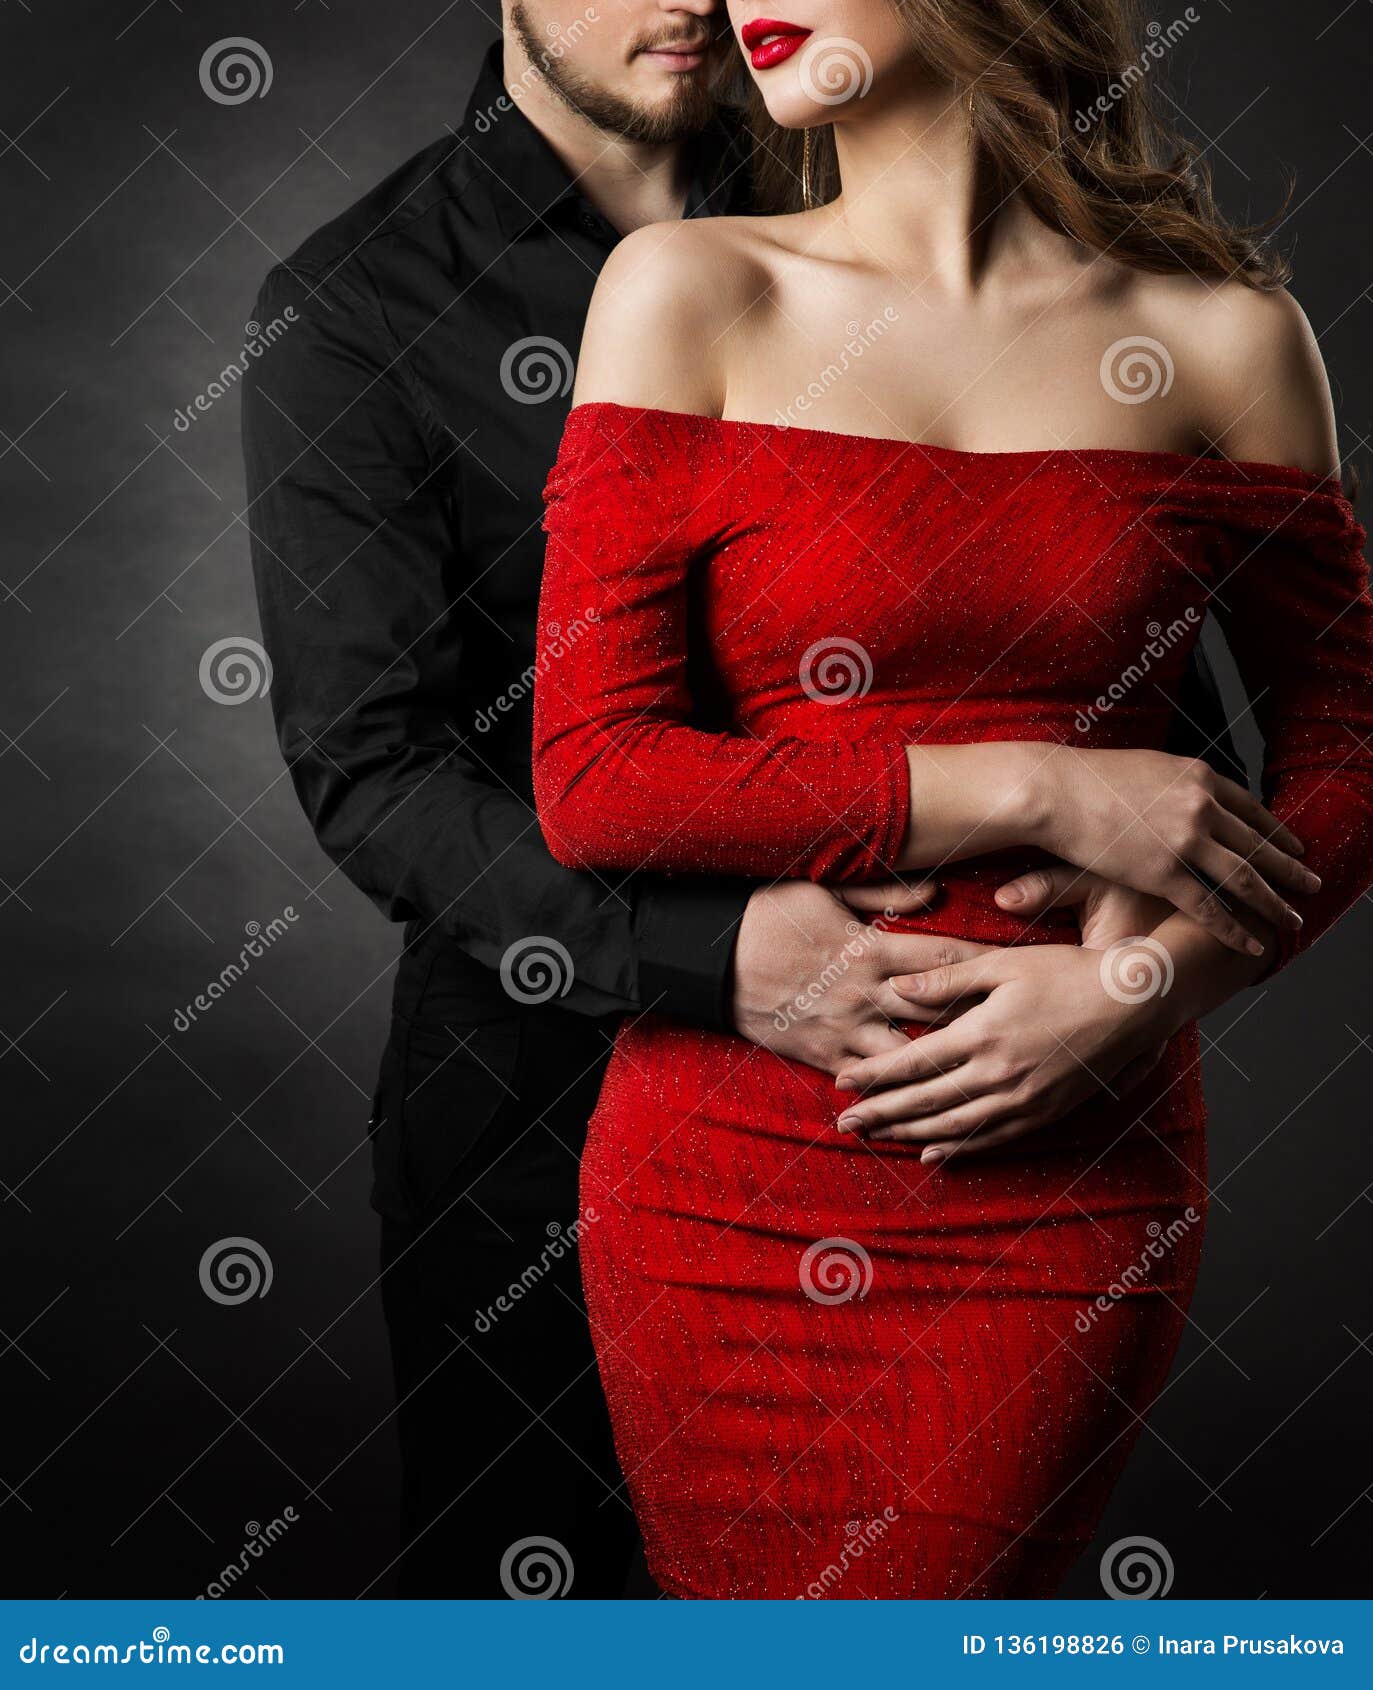 couple fashion beauty, woman in red dress and embracing man in love